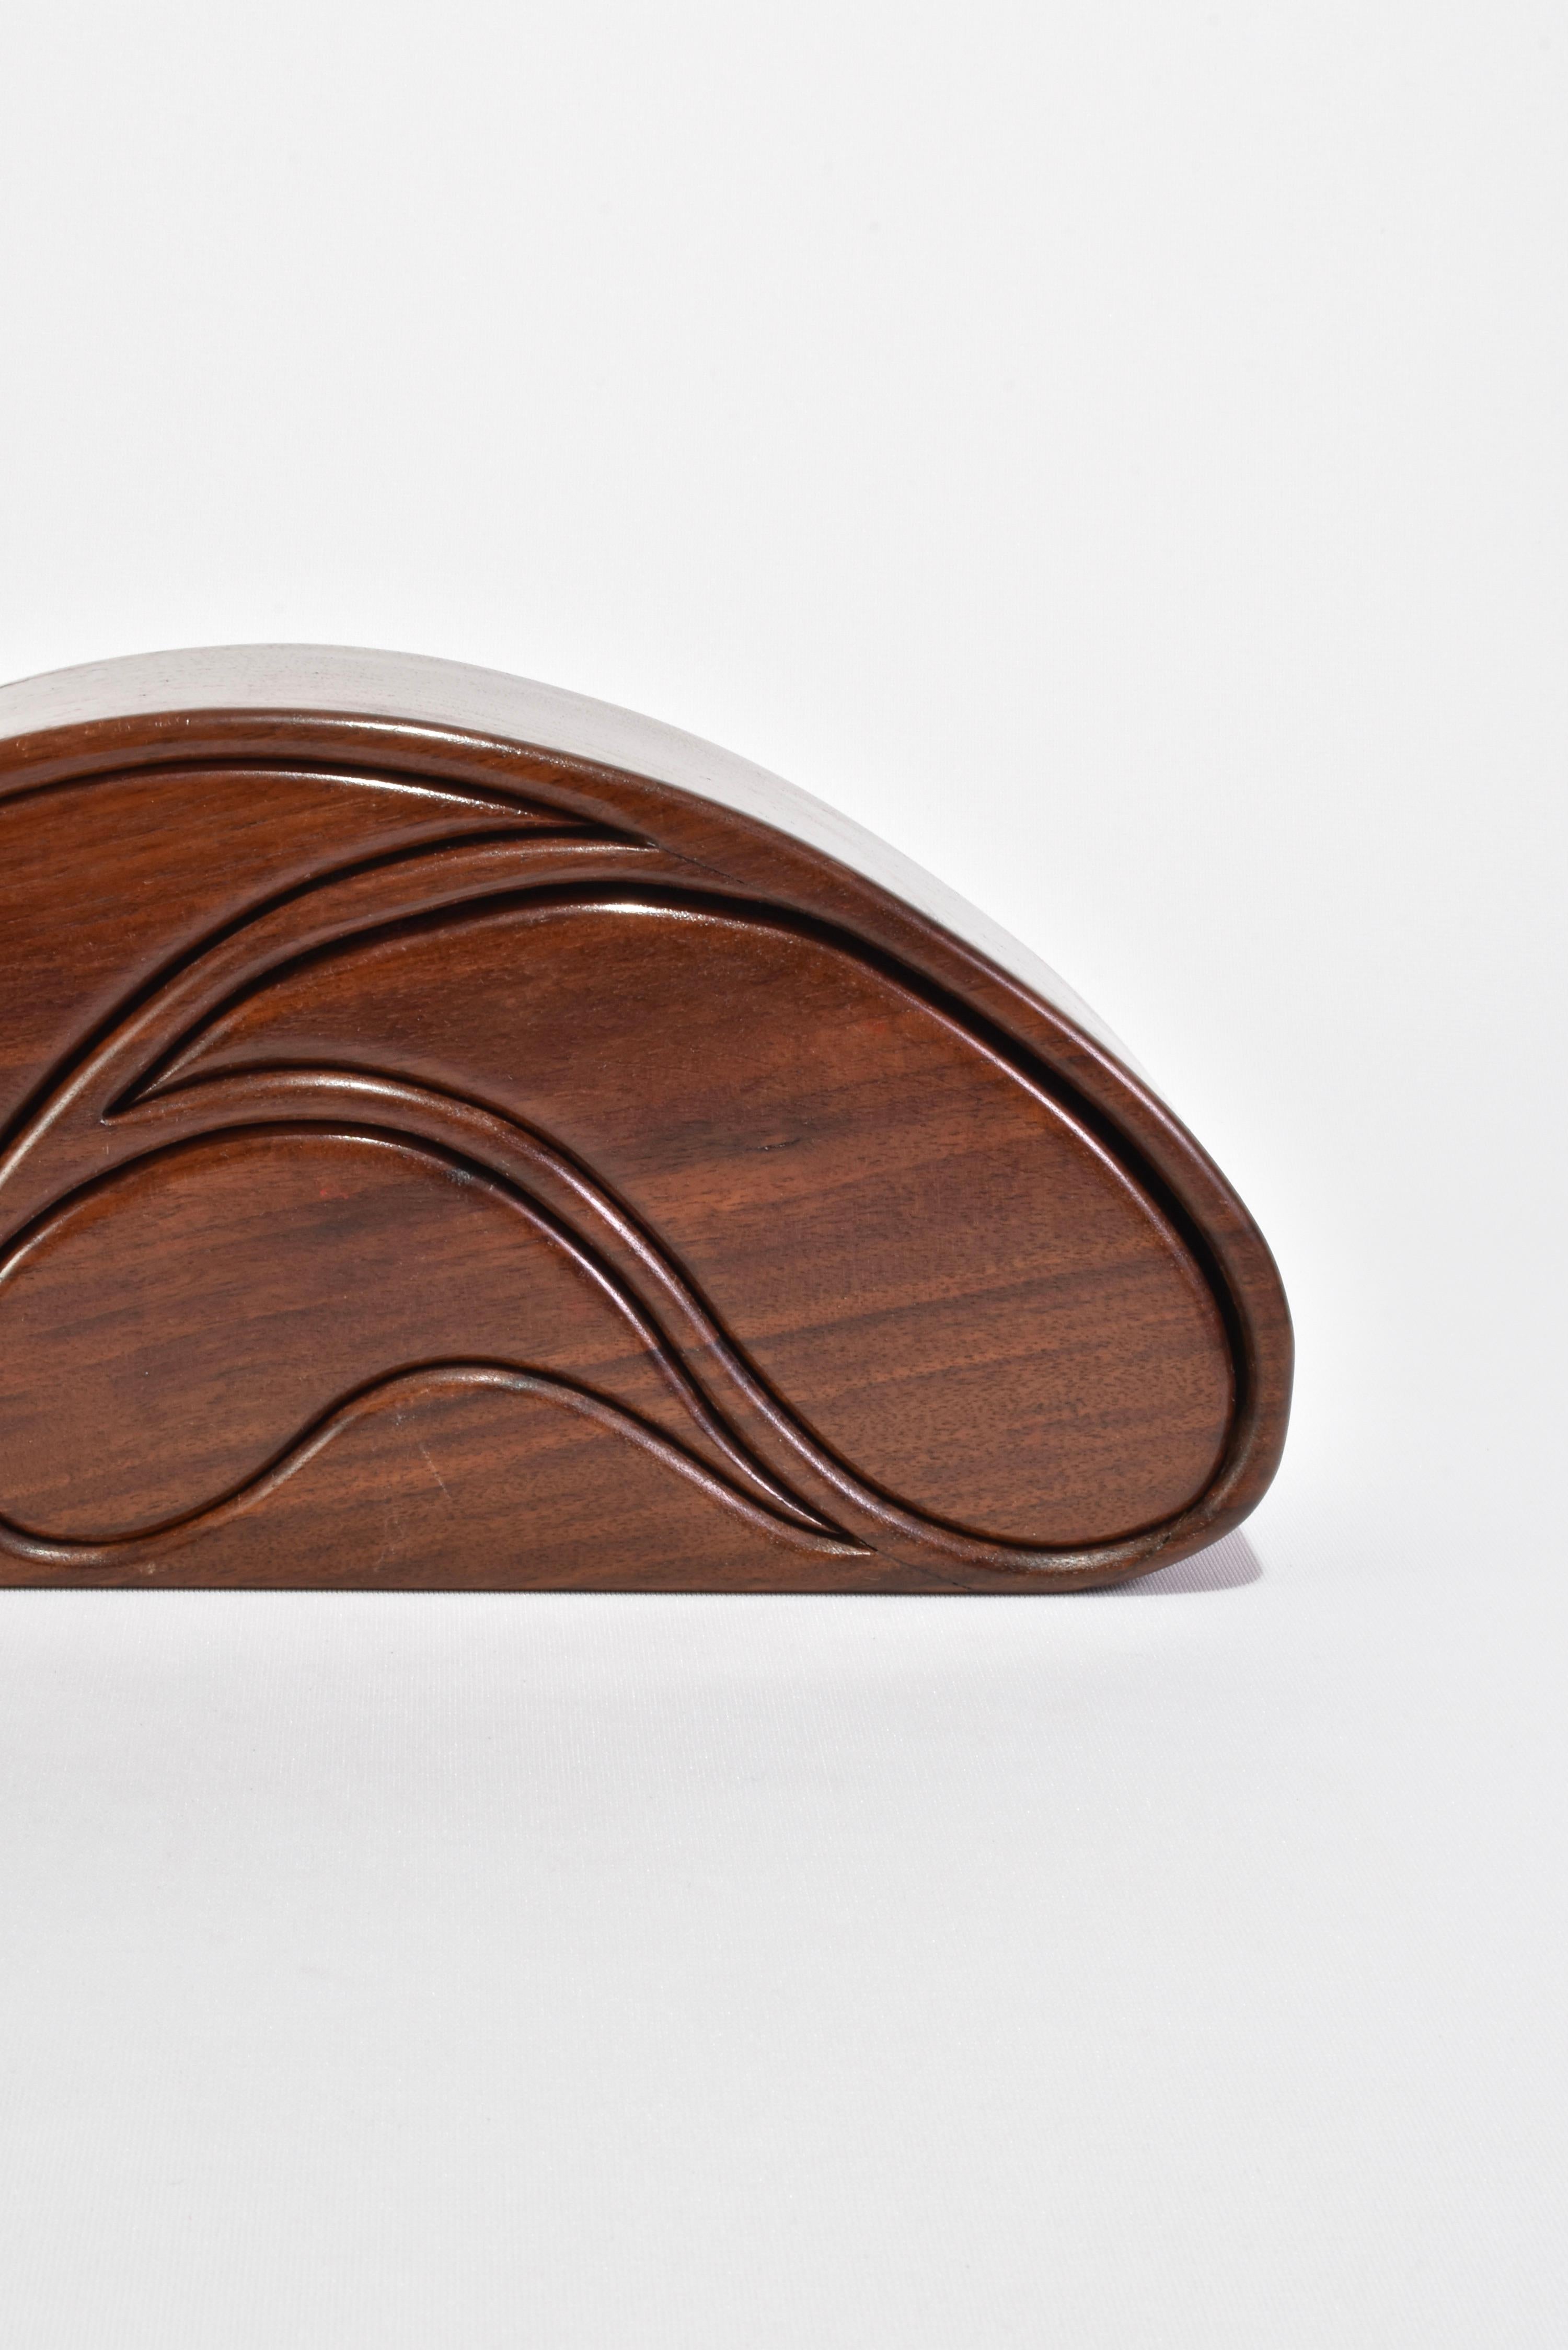 Hand-carved wooden jewelry box in a curved shape with three drawers and five compartments lined in red felt.